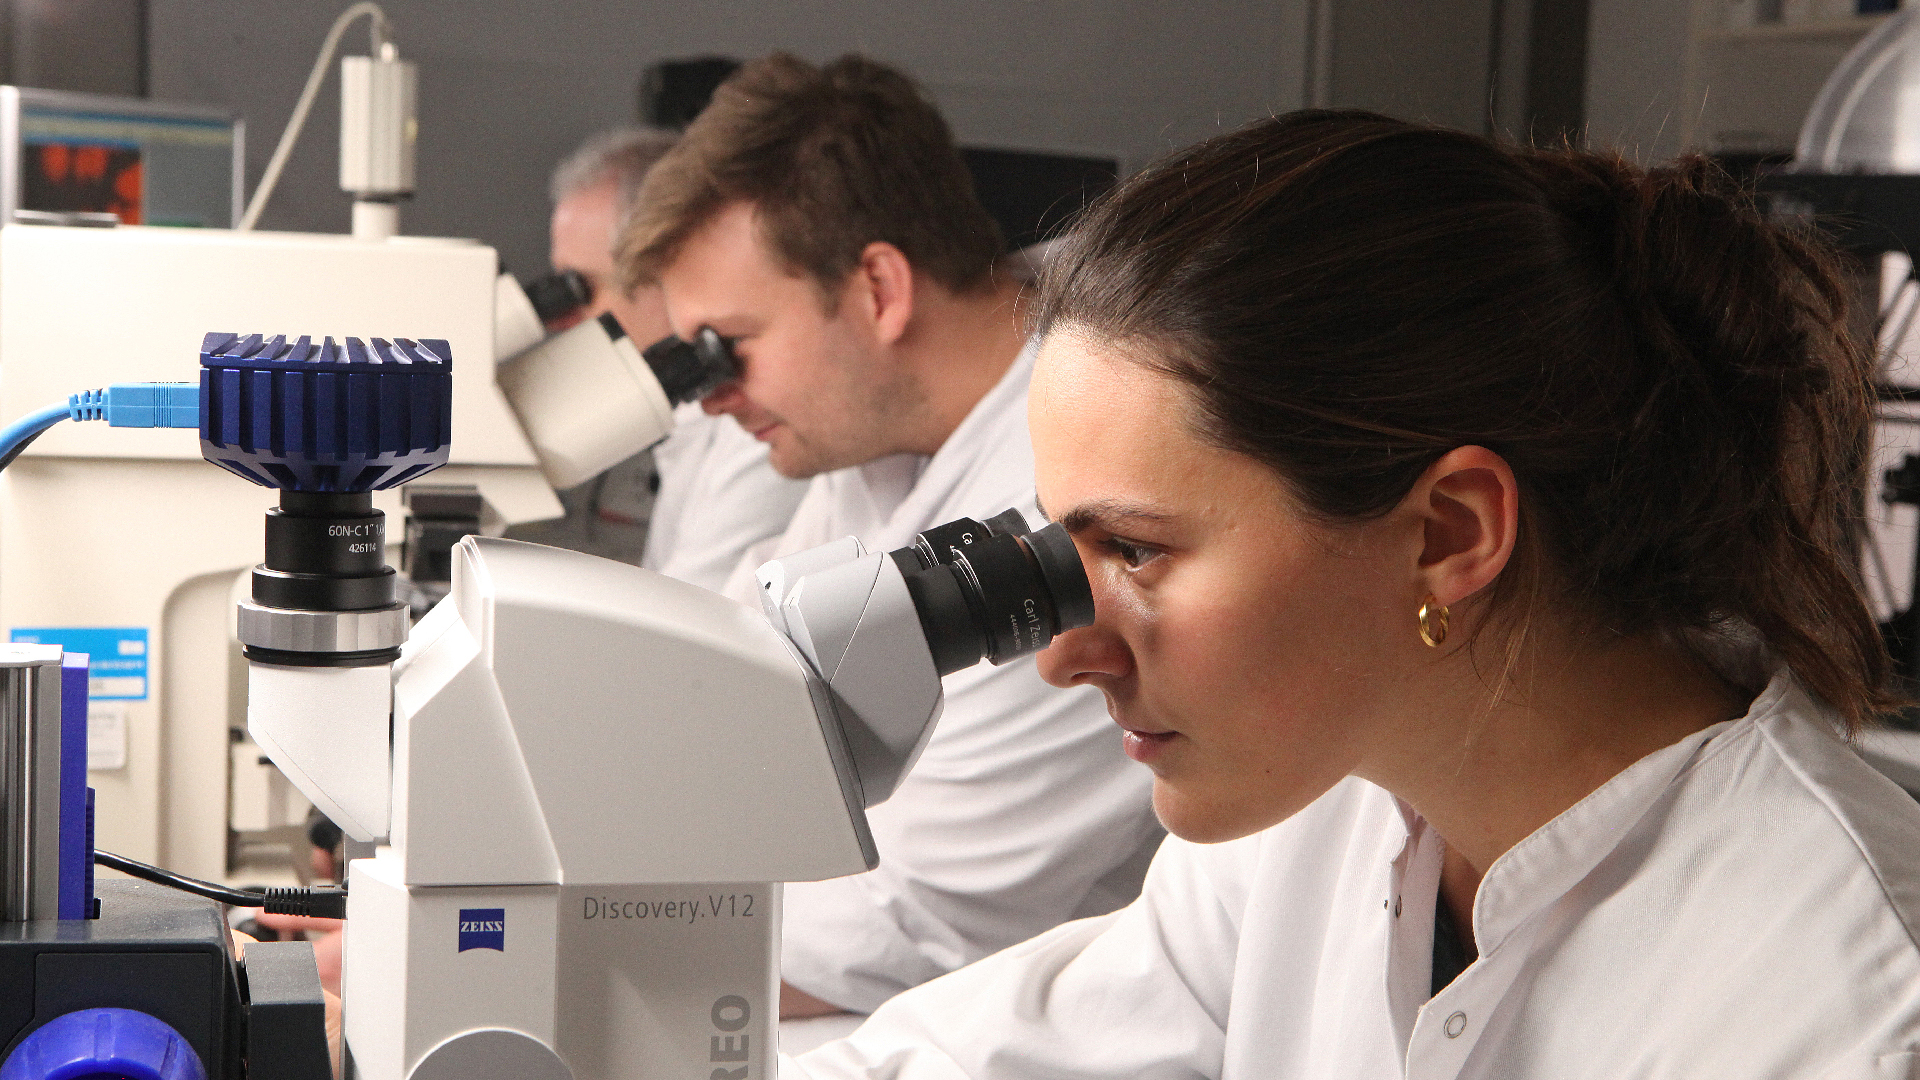 Researchers looking into microscopes